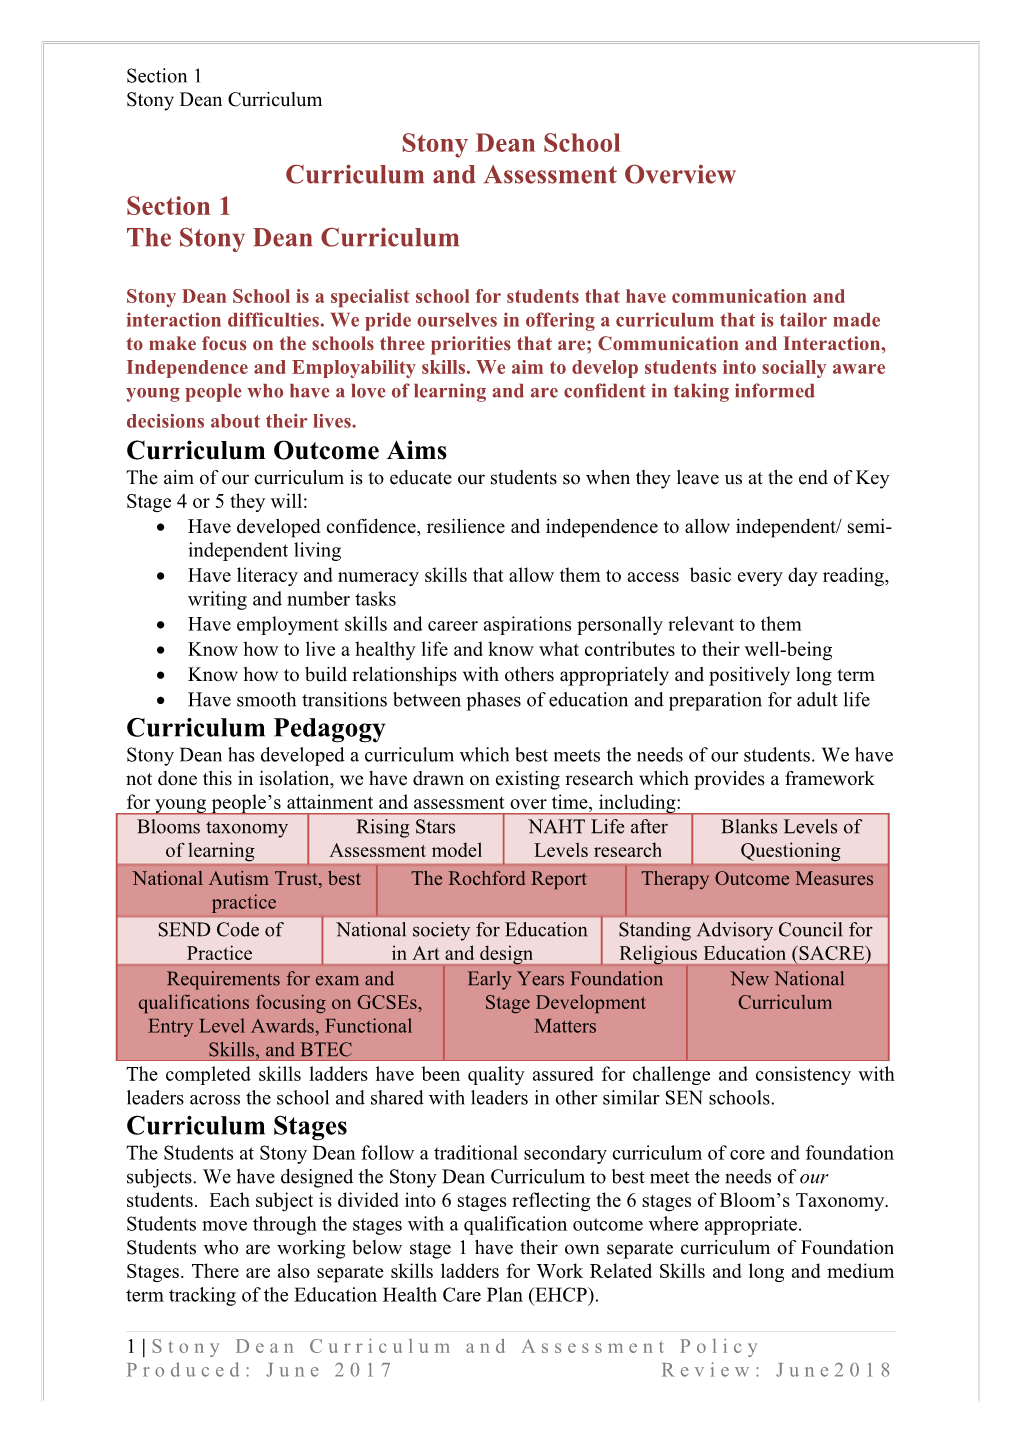 Stony Dean School Curriculum and Assessment Overview